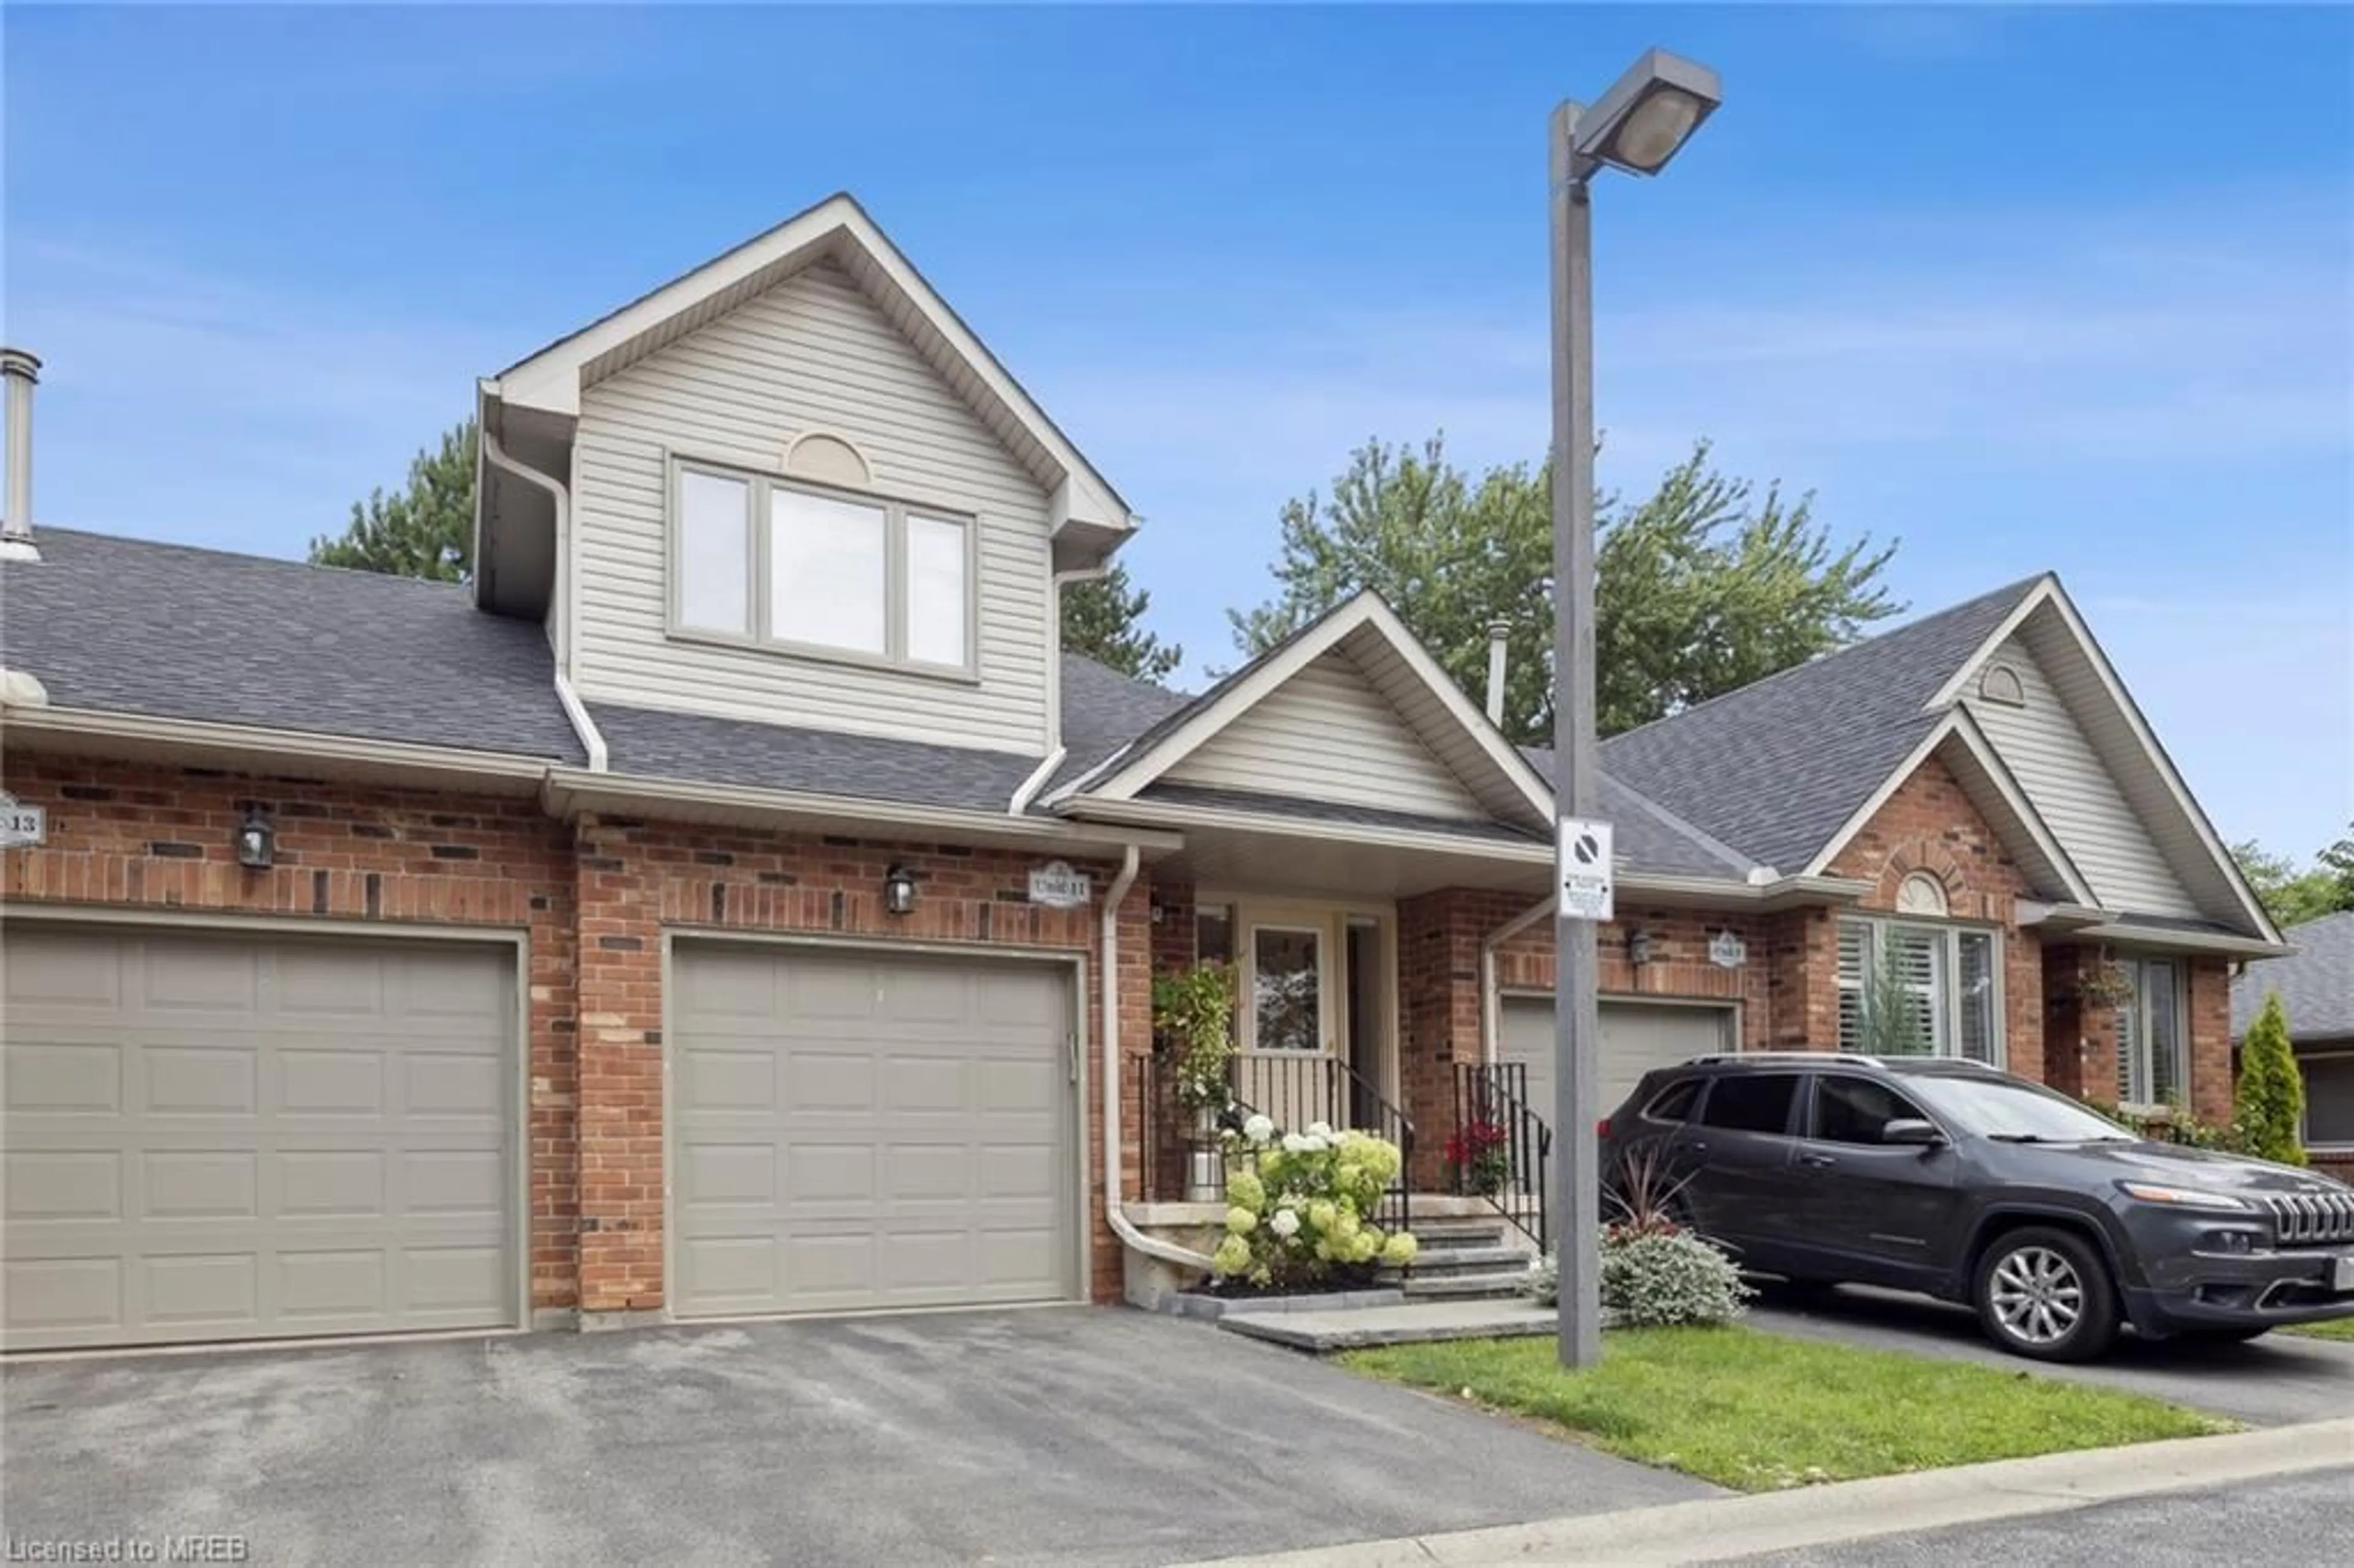 Home with brick exterior material for 78 Pirie Dr #11, Hamilton Ontario L9H 6Y9